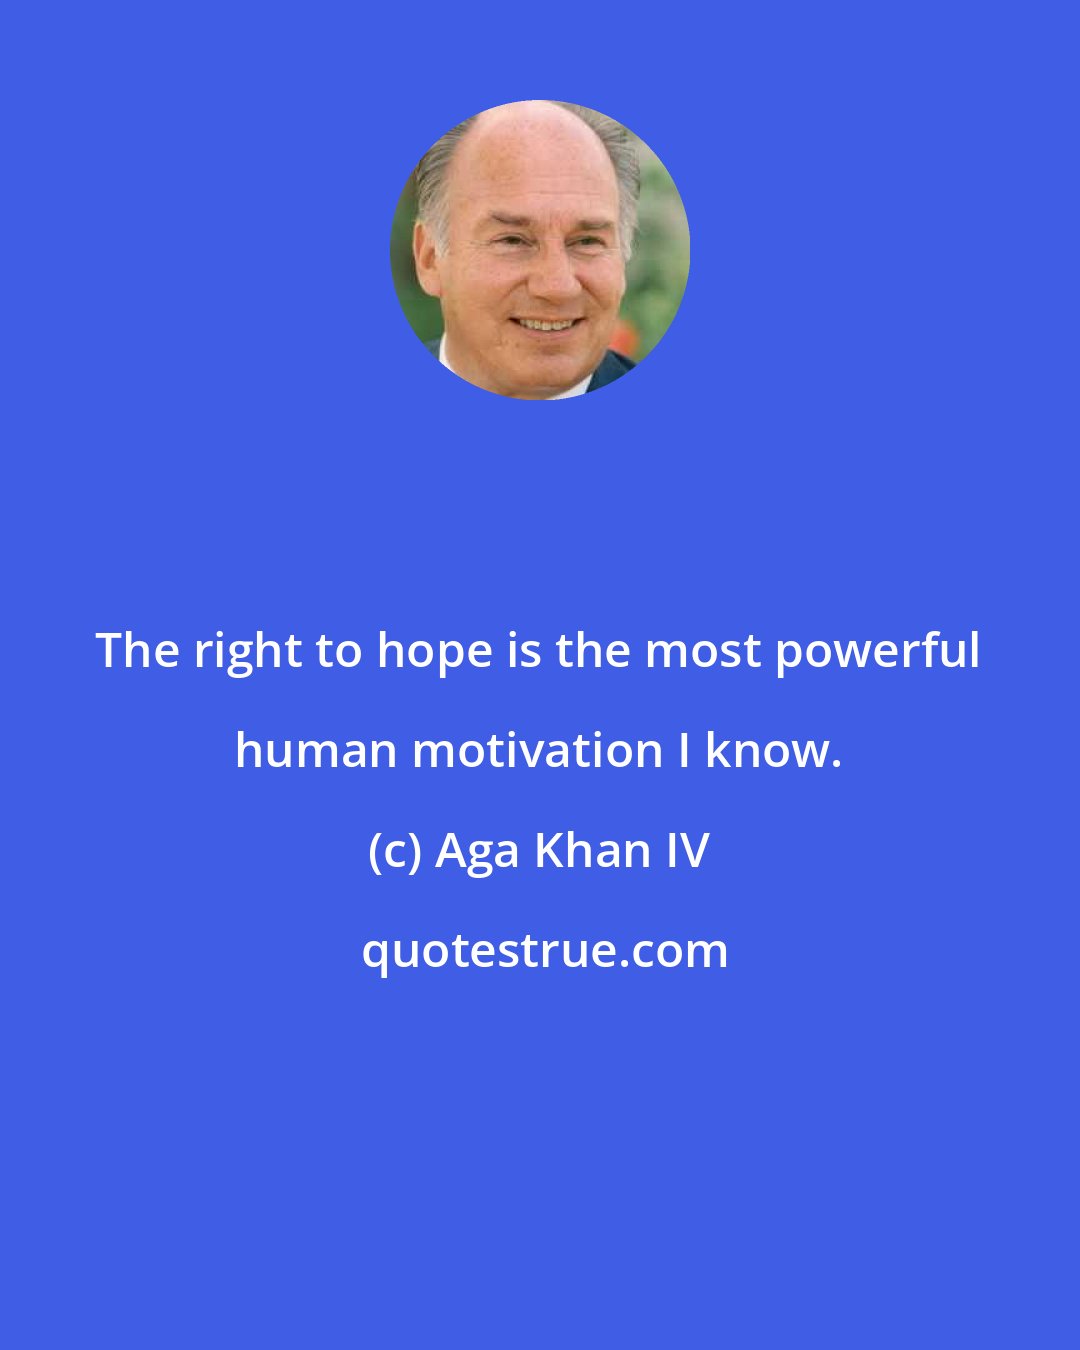 Aga Khan IV: The right to hope is the most powerful human motivation I know.